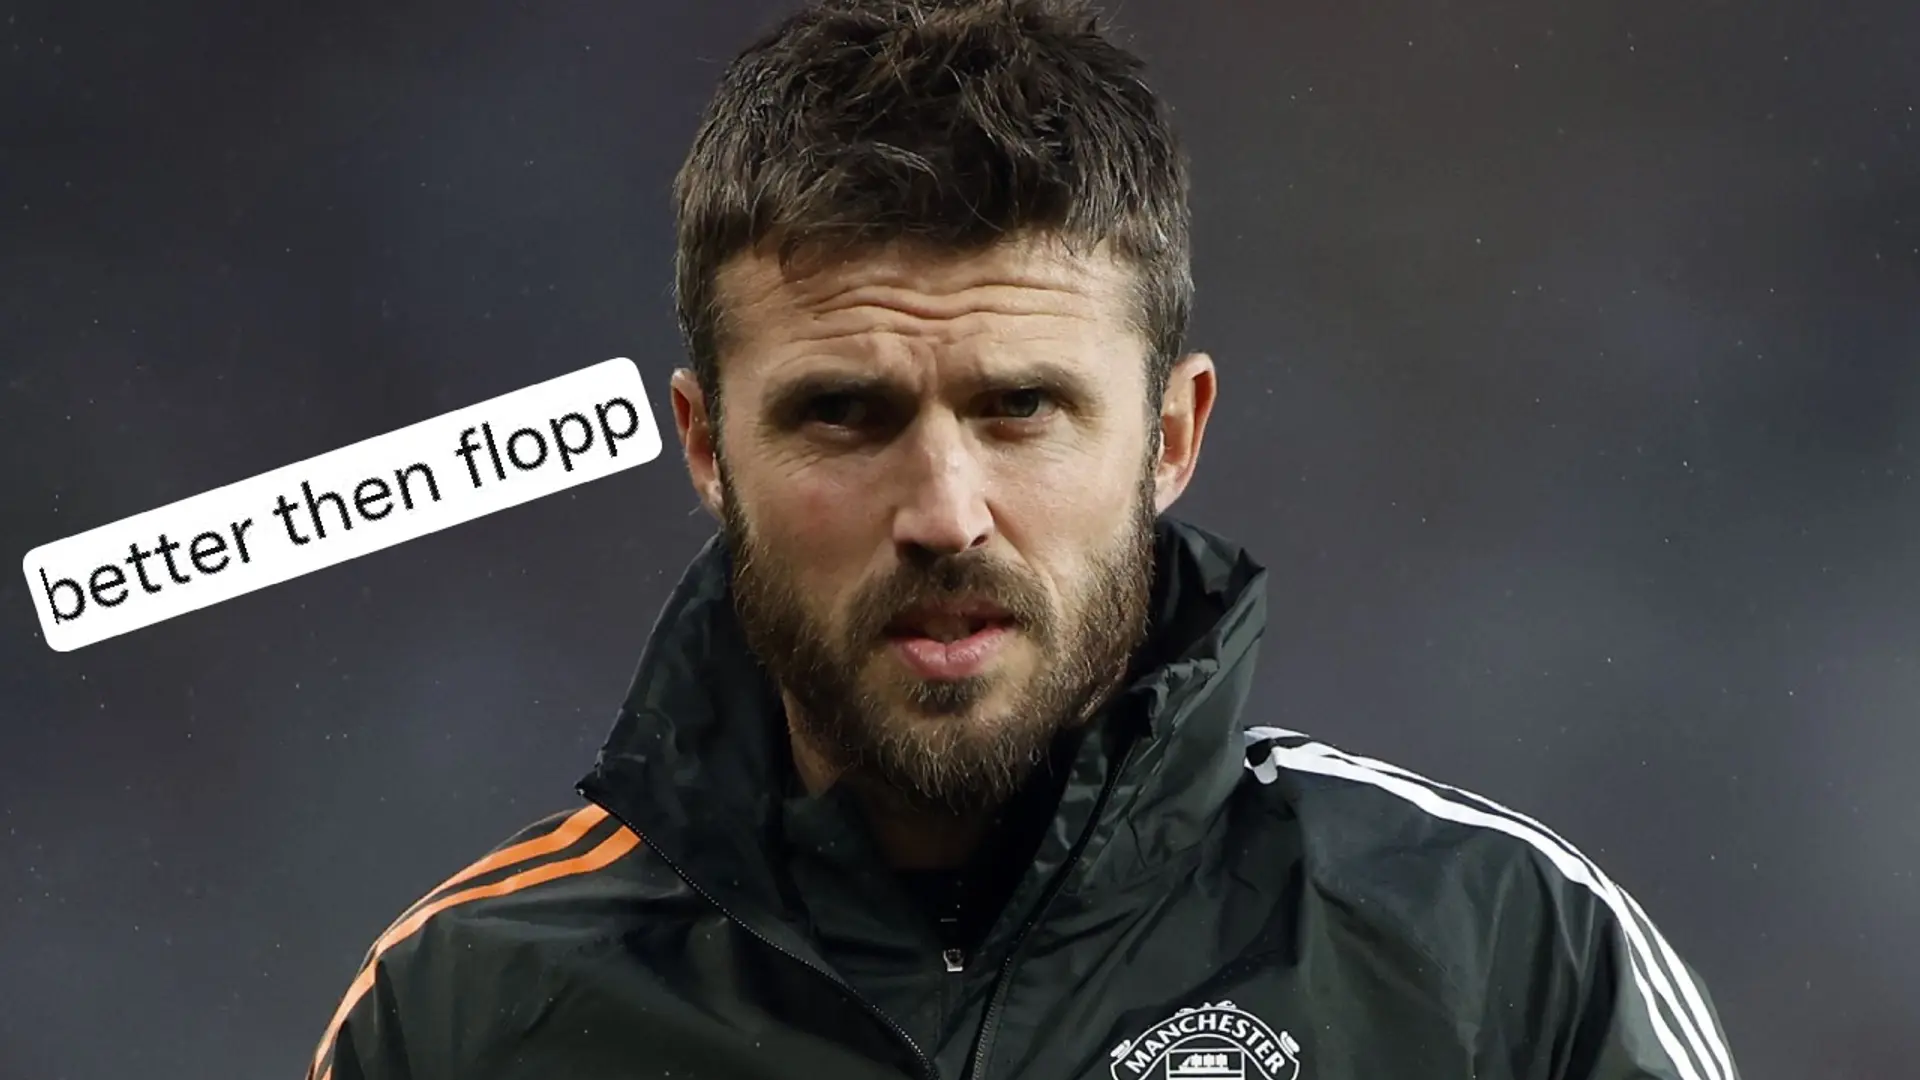 'Winning the Championship': Man United fans wish Carrick well at Middlesbrough 